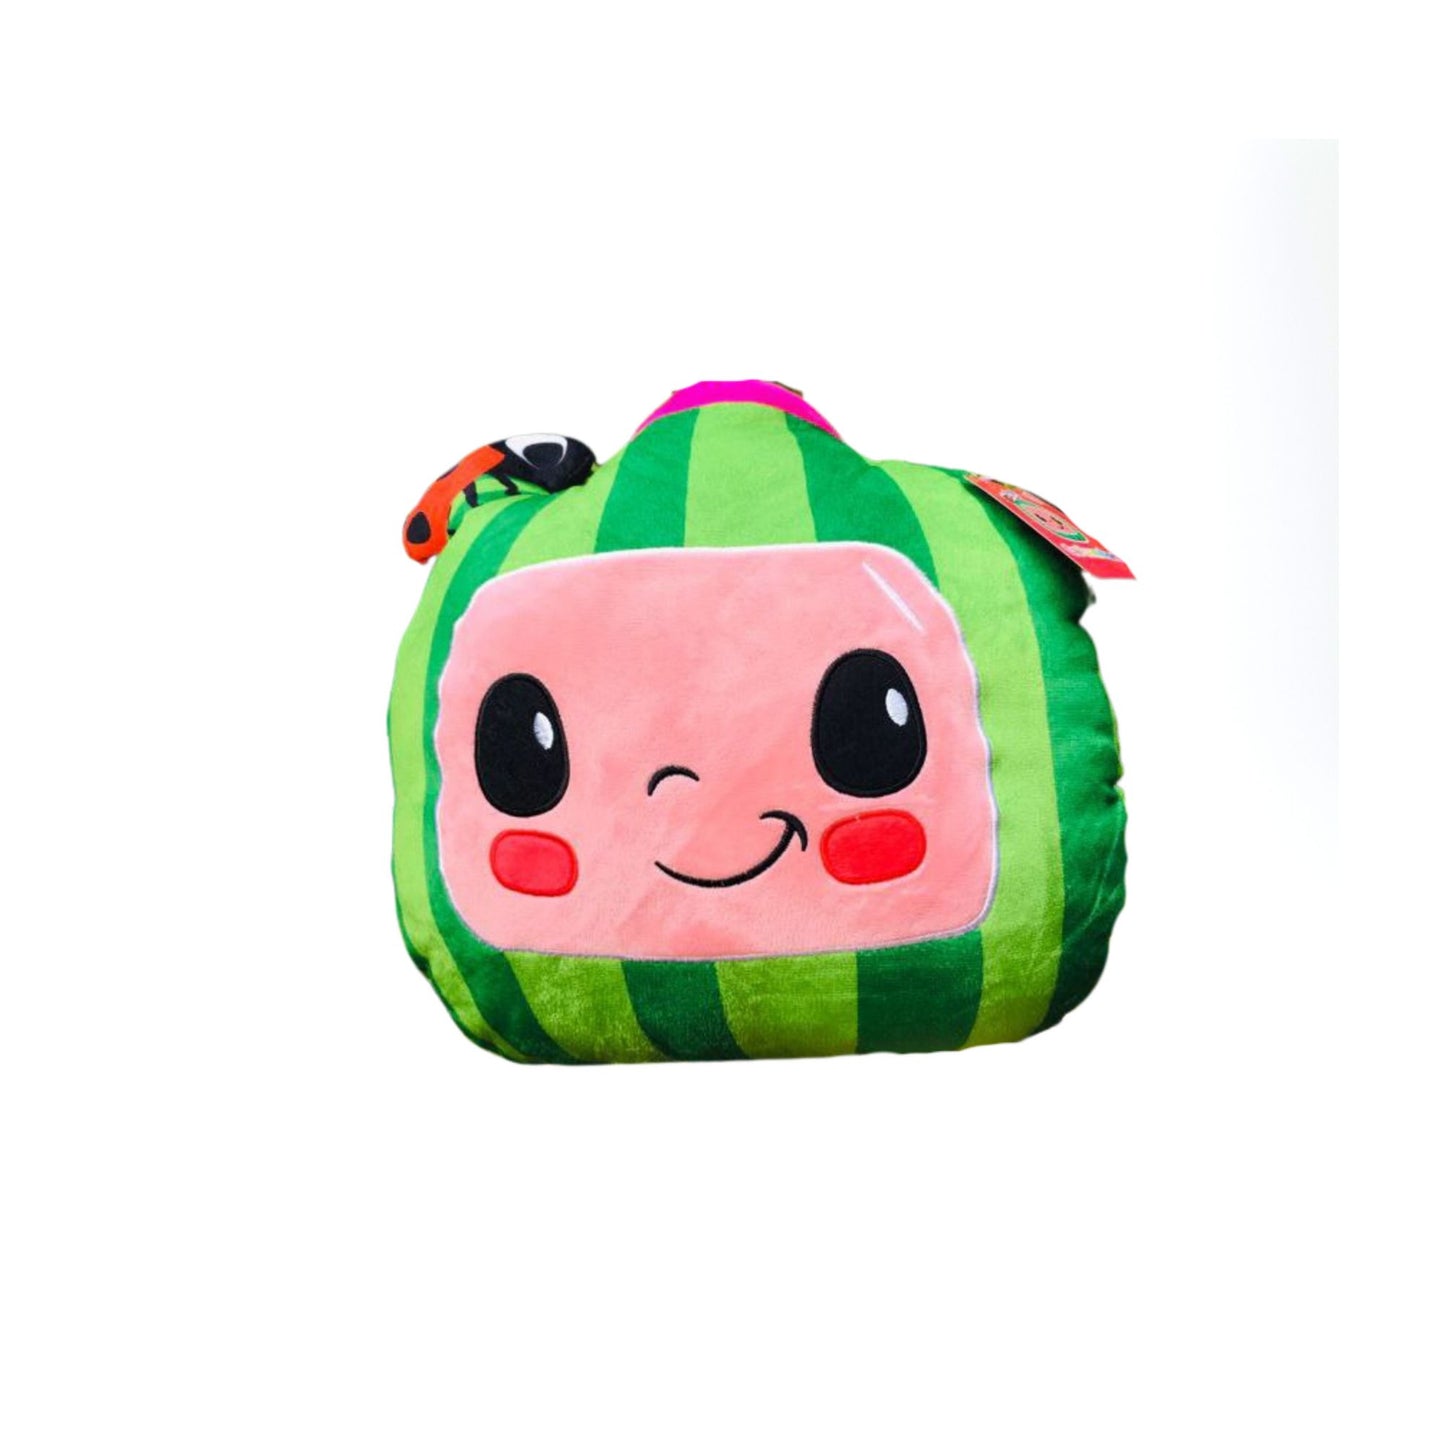 Cocomelon Plush Pillow - Watermelon I Designed with soft cushiony materials, Provide comfort while sleeping, and Can be used as props for role playing